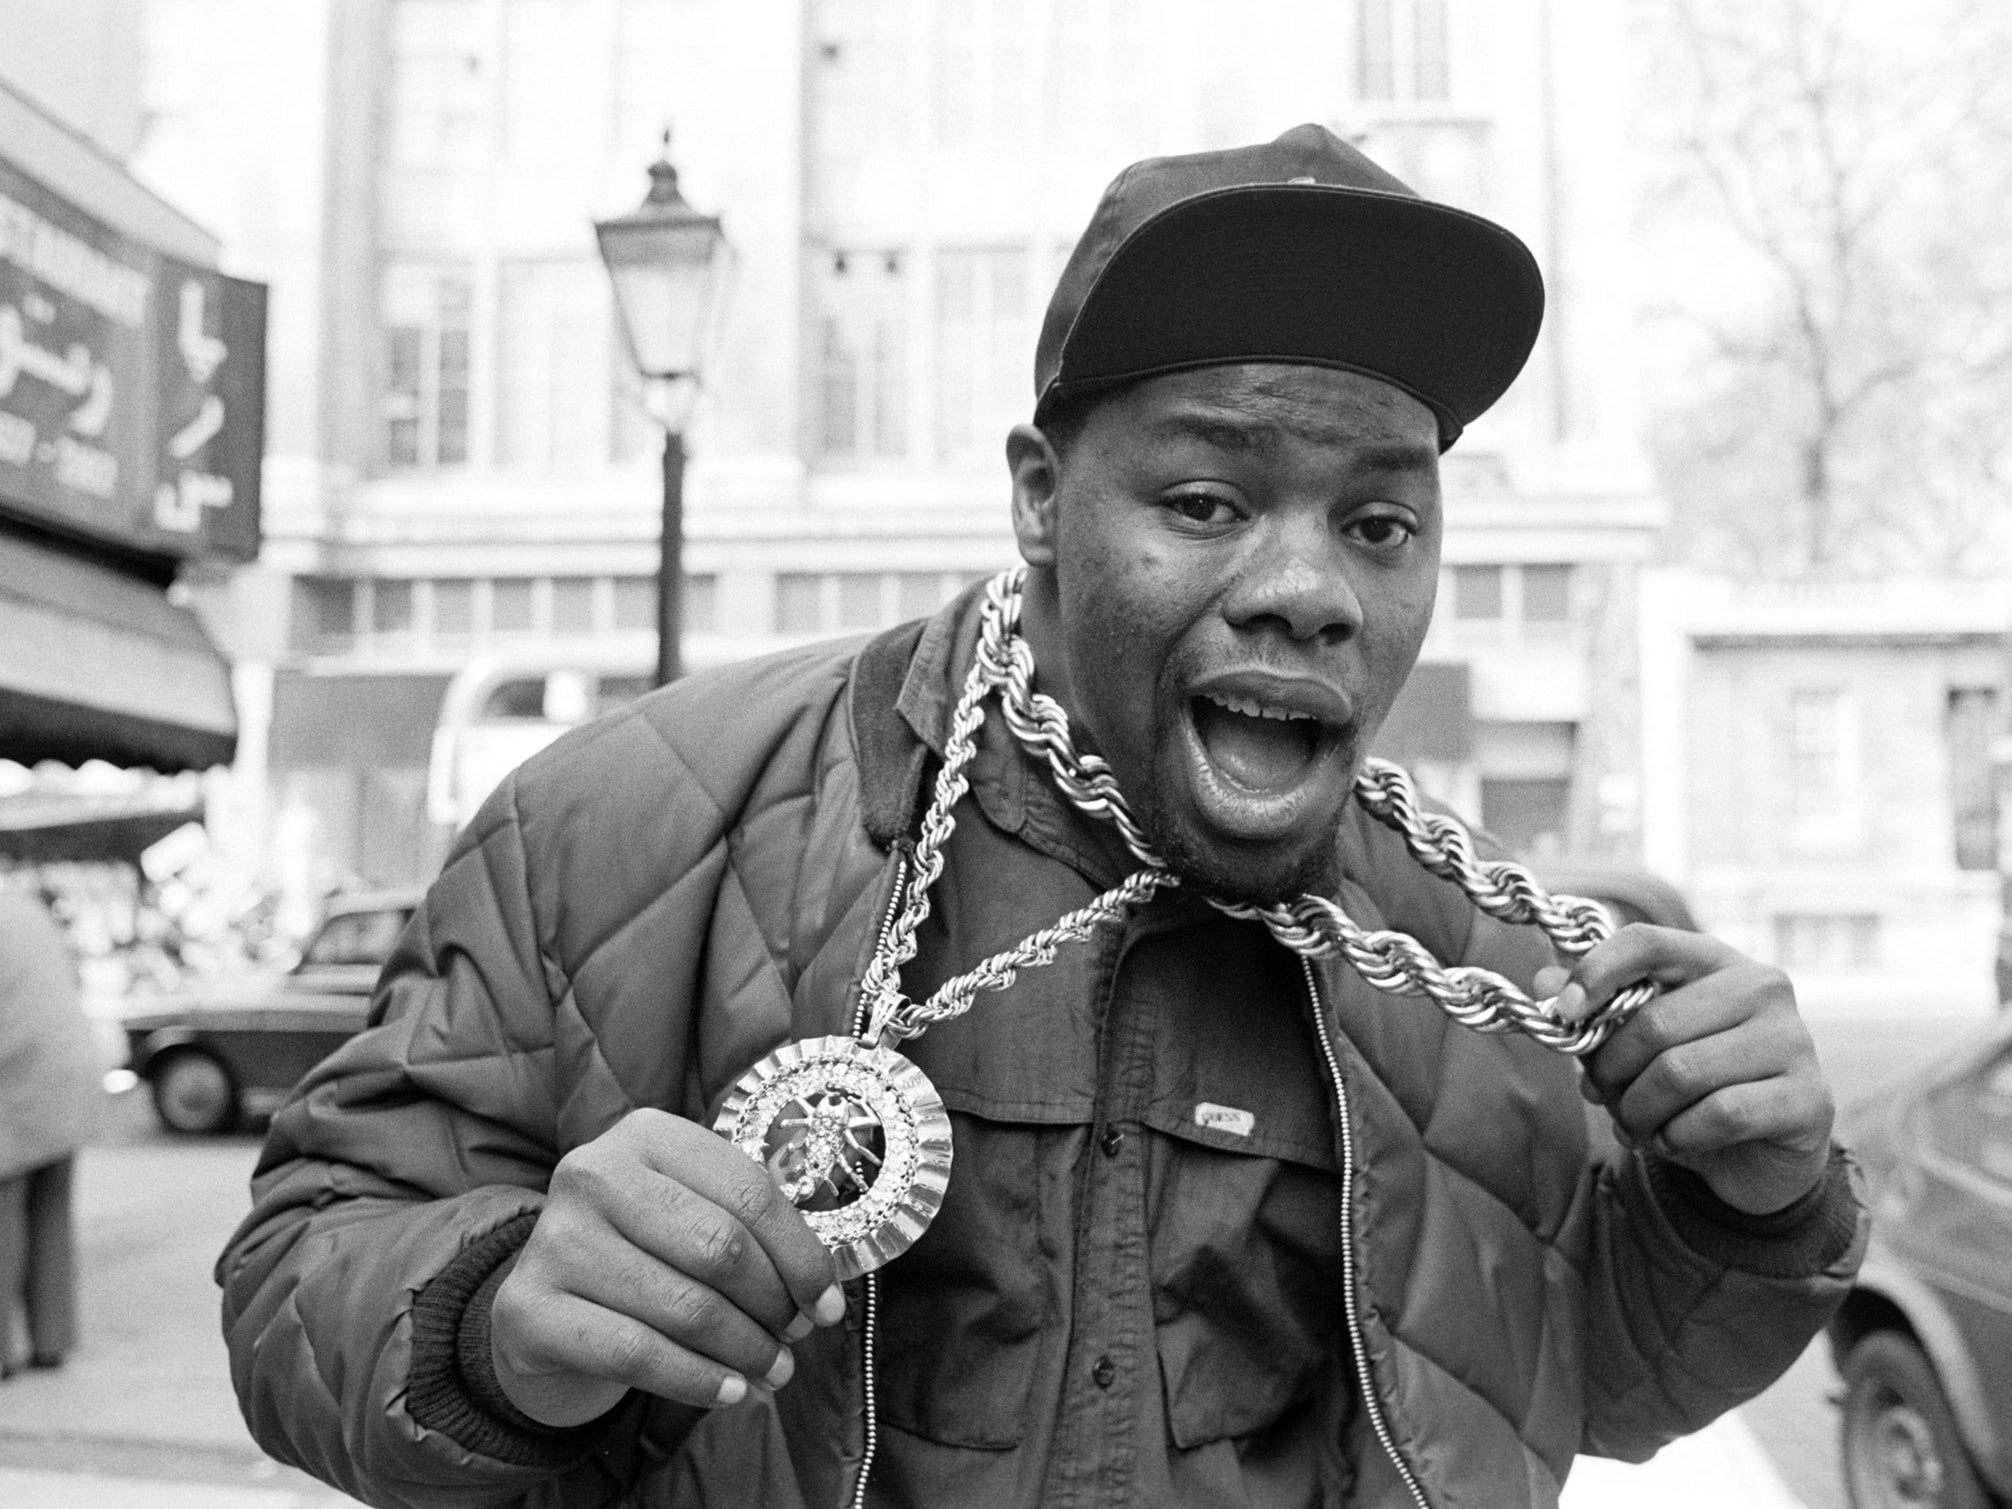 Biz Markie near the offices of Warner Bros Records in London, 1988